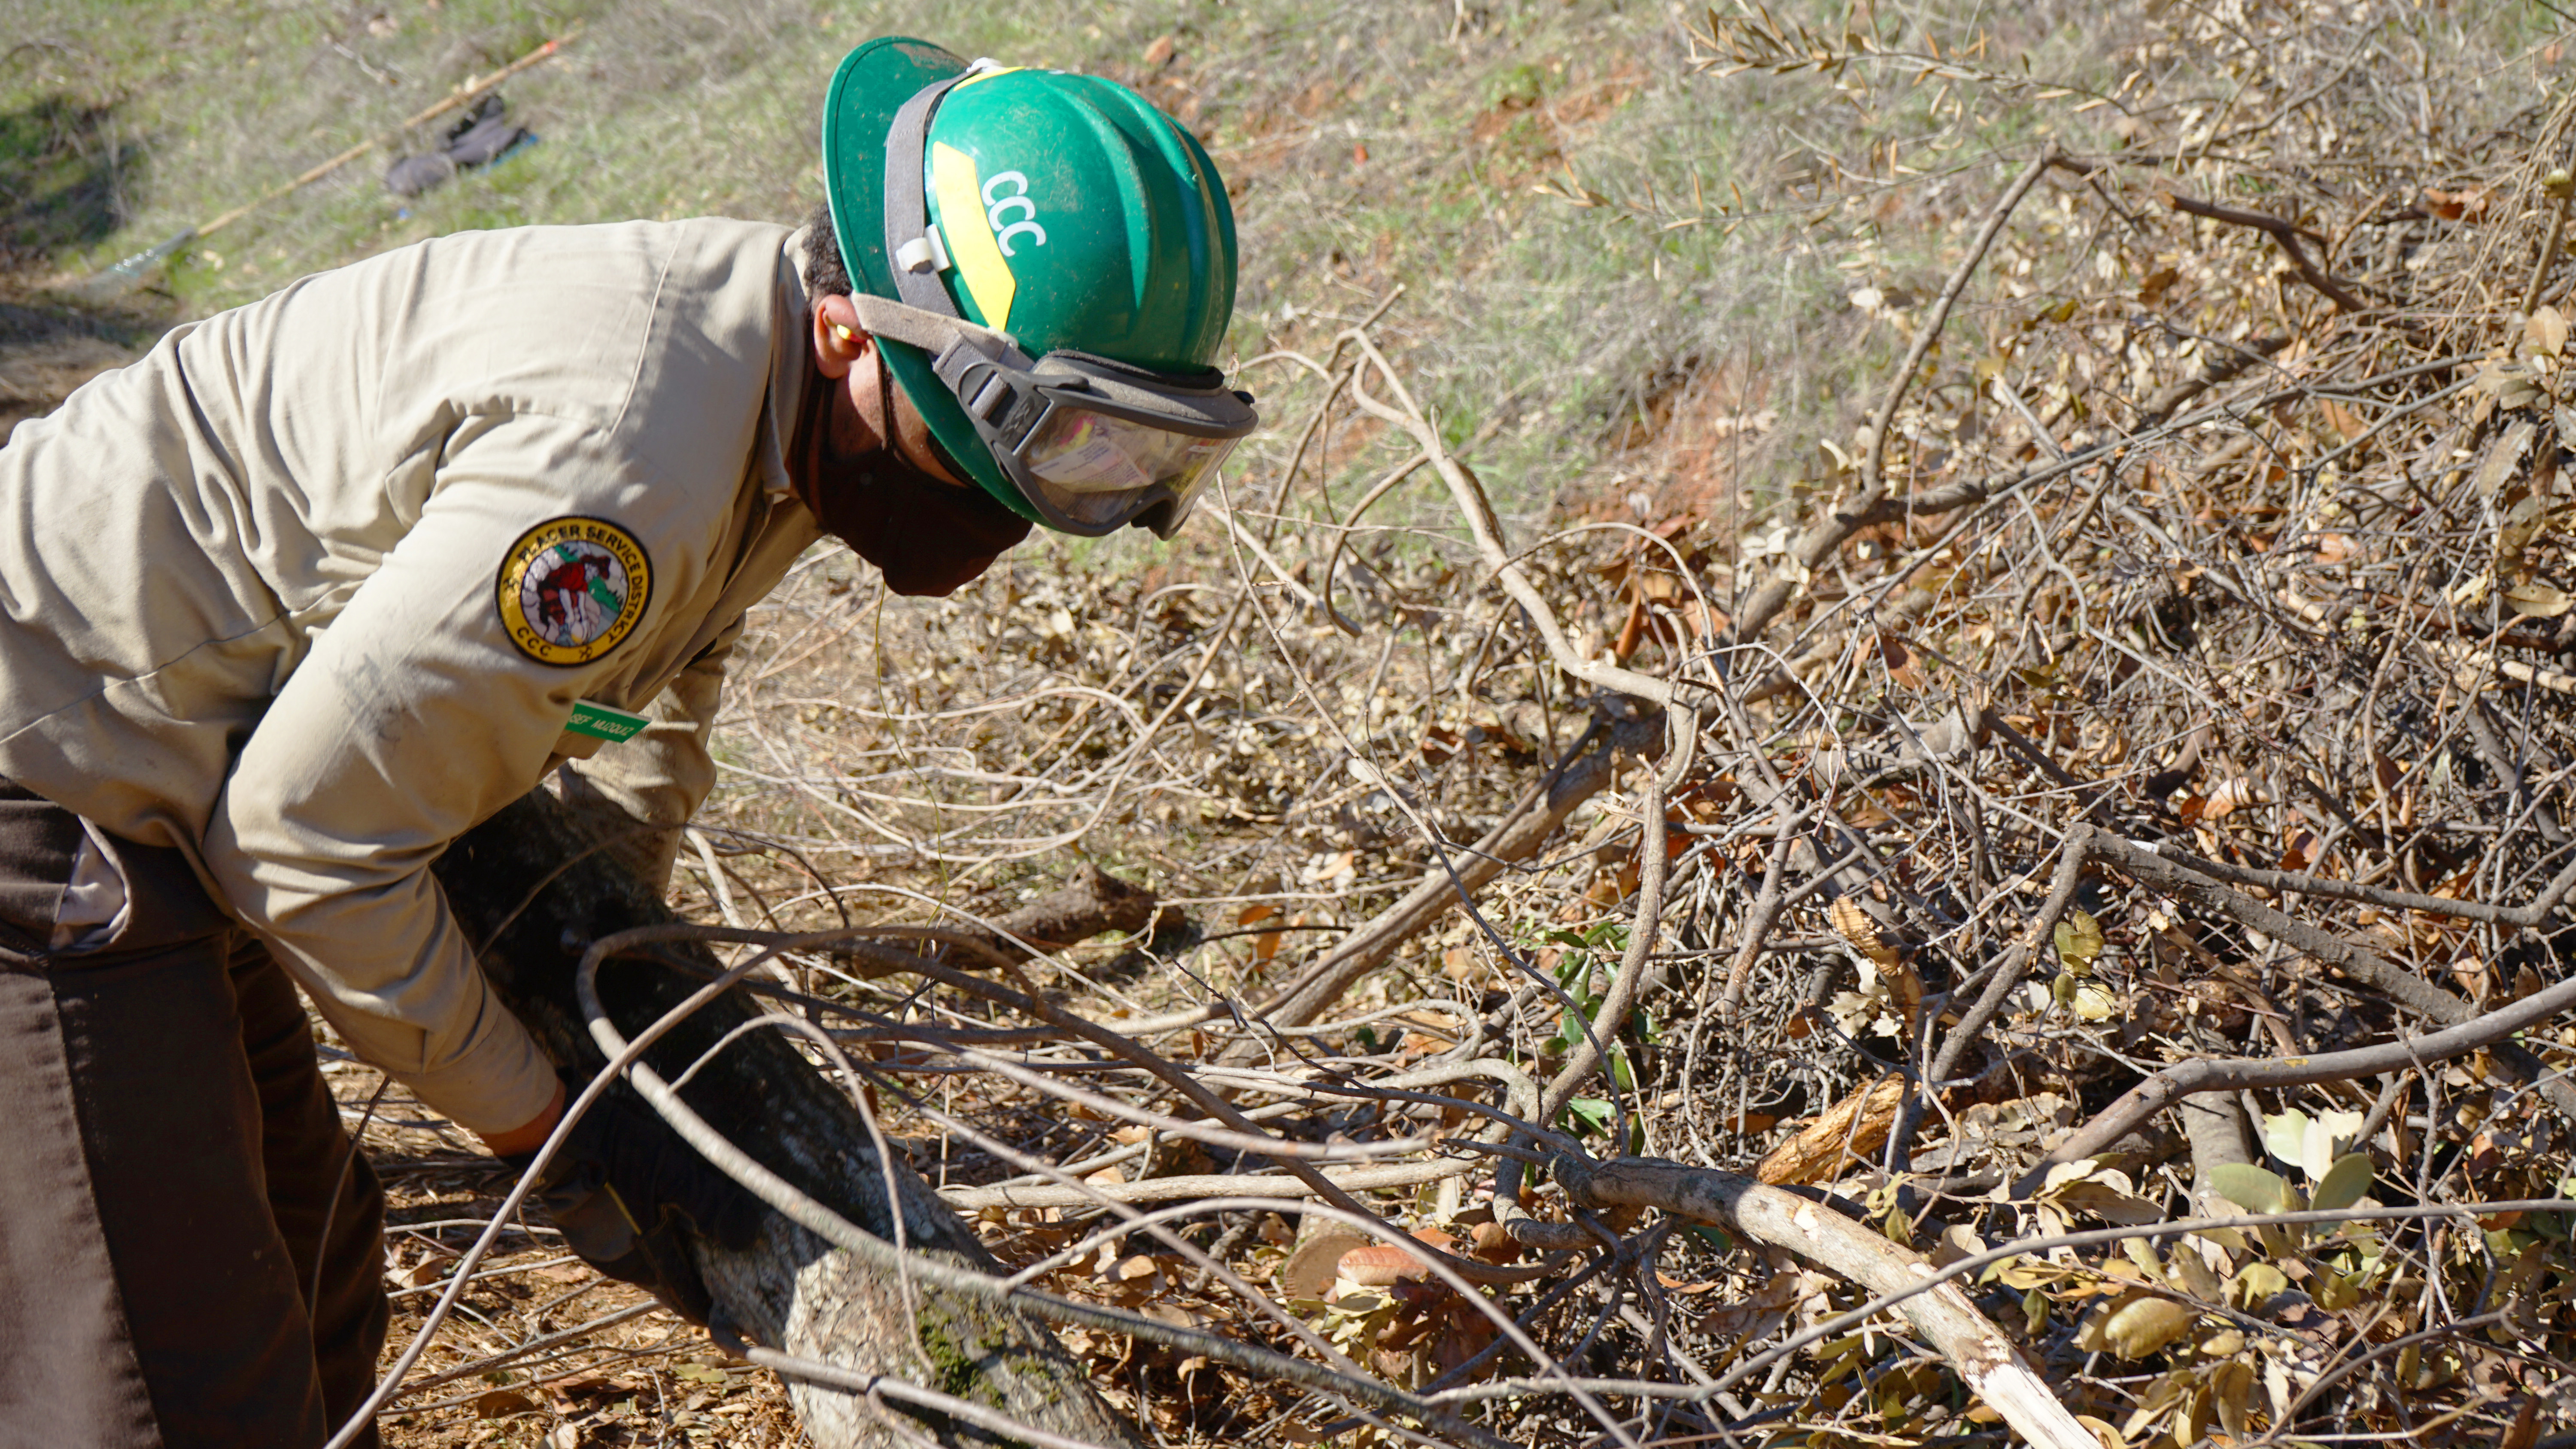 Male in green helmet bends over to pick up sticks from pile for chipping